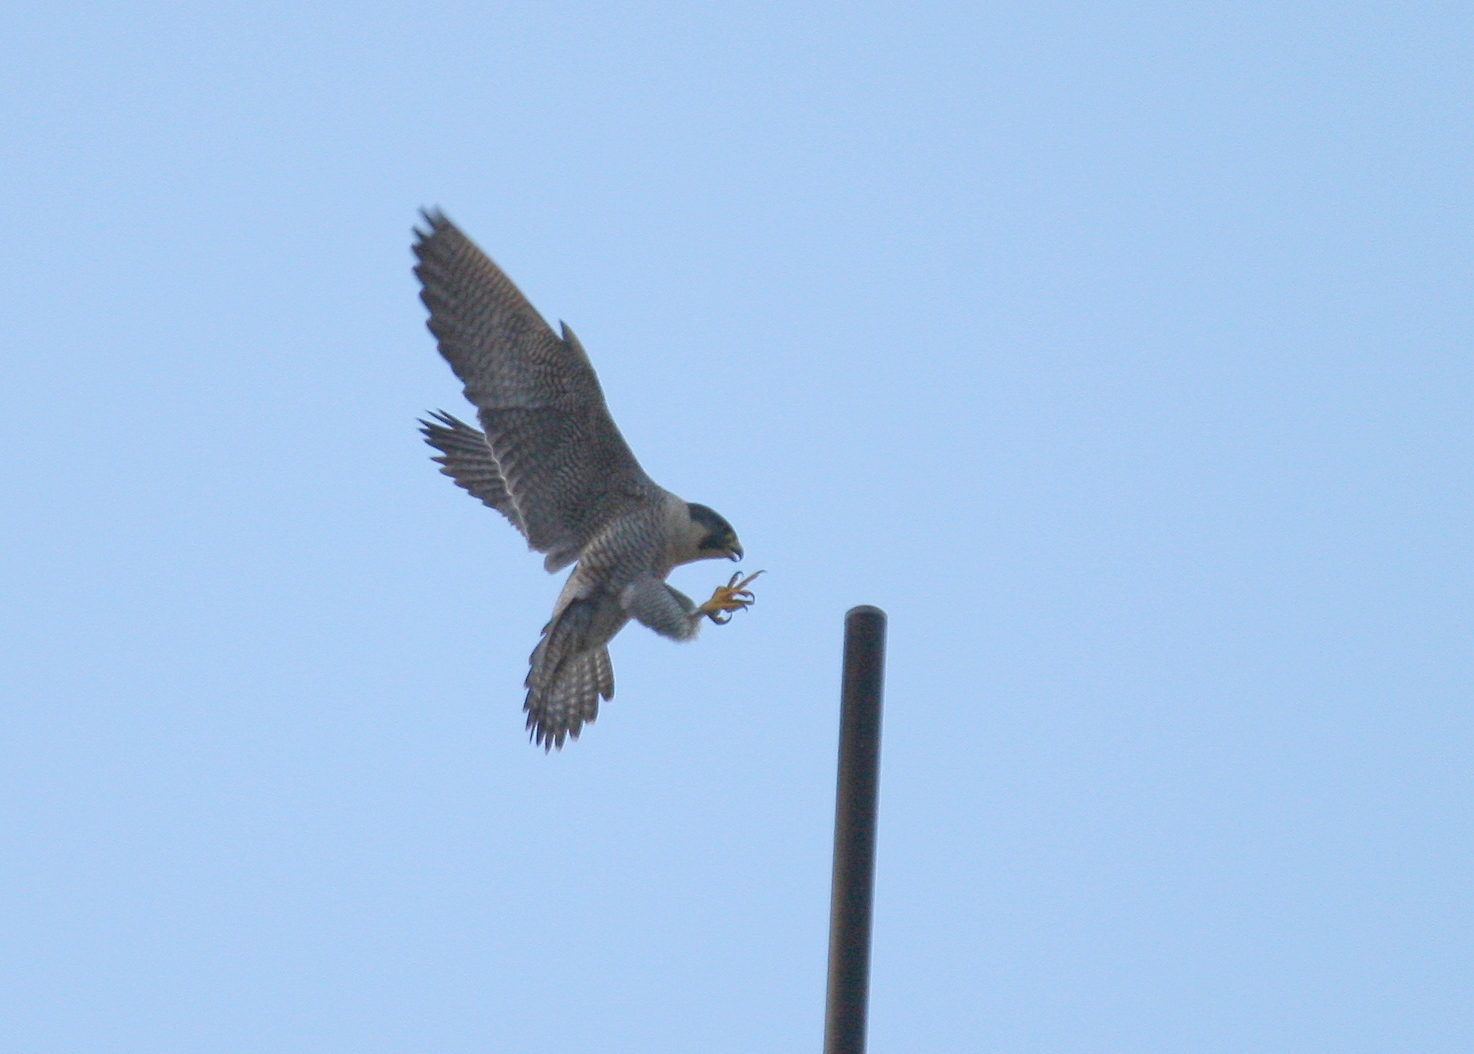 Peregrine landing on short antenna; south side of rooftop